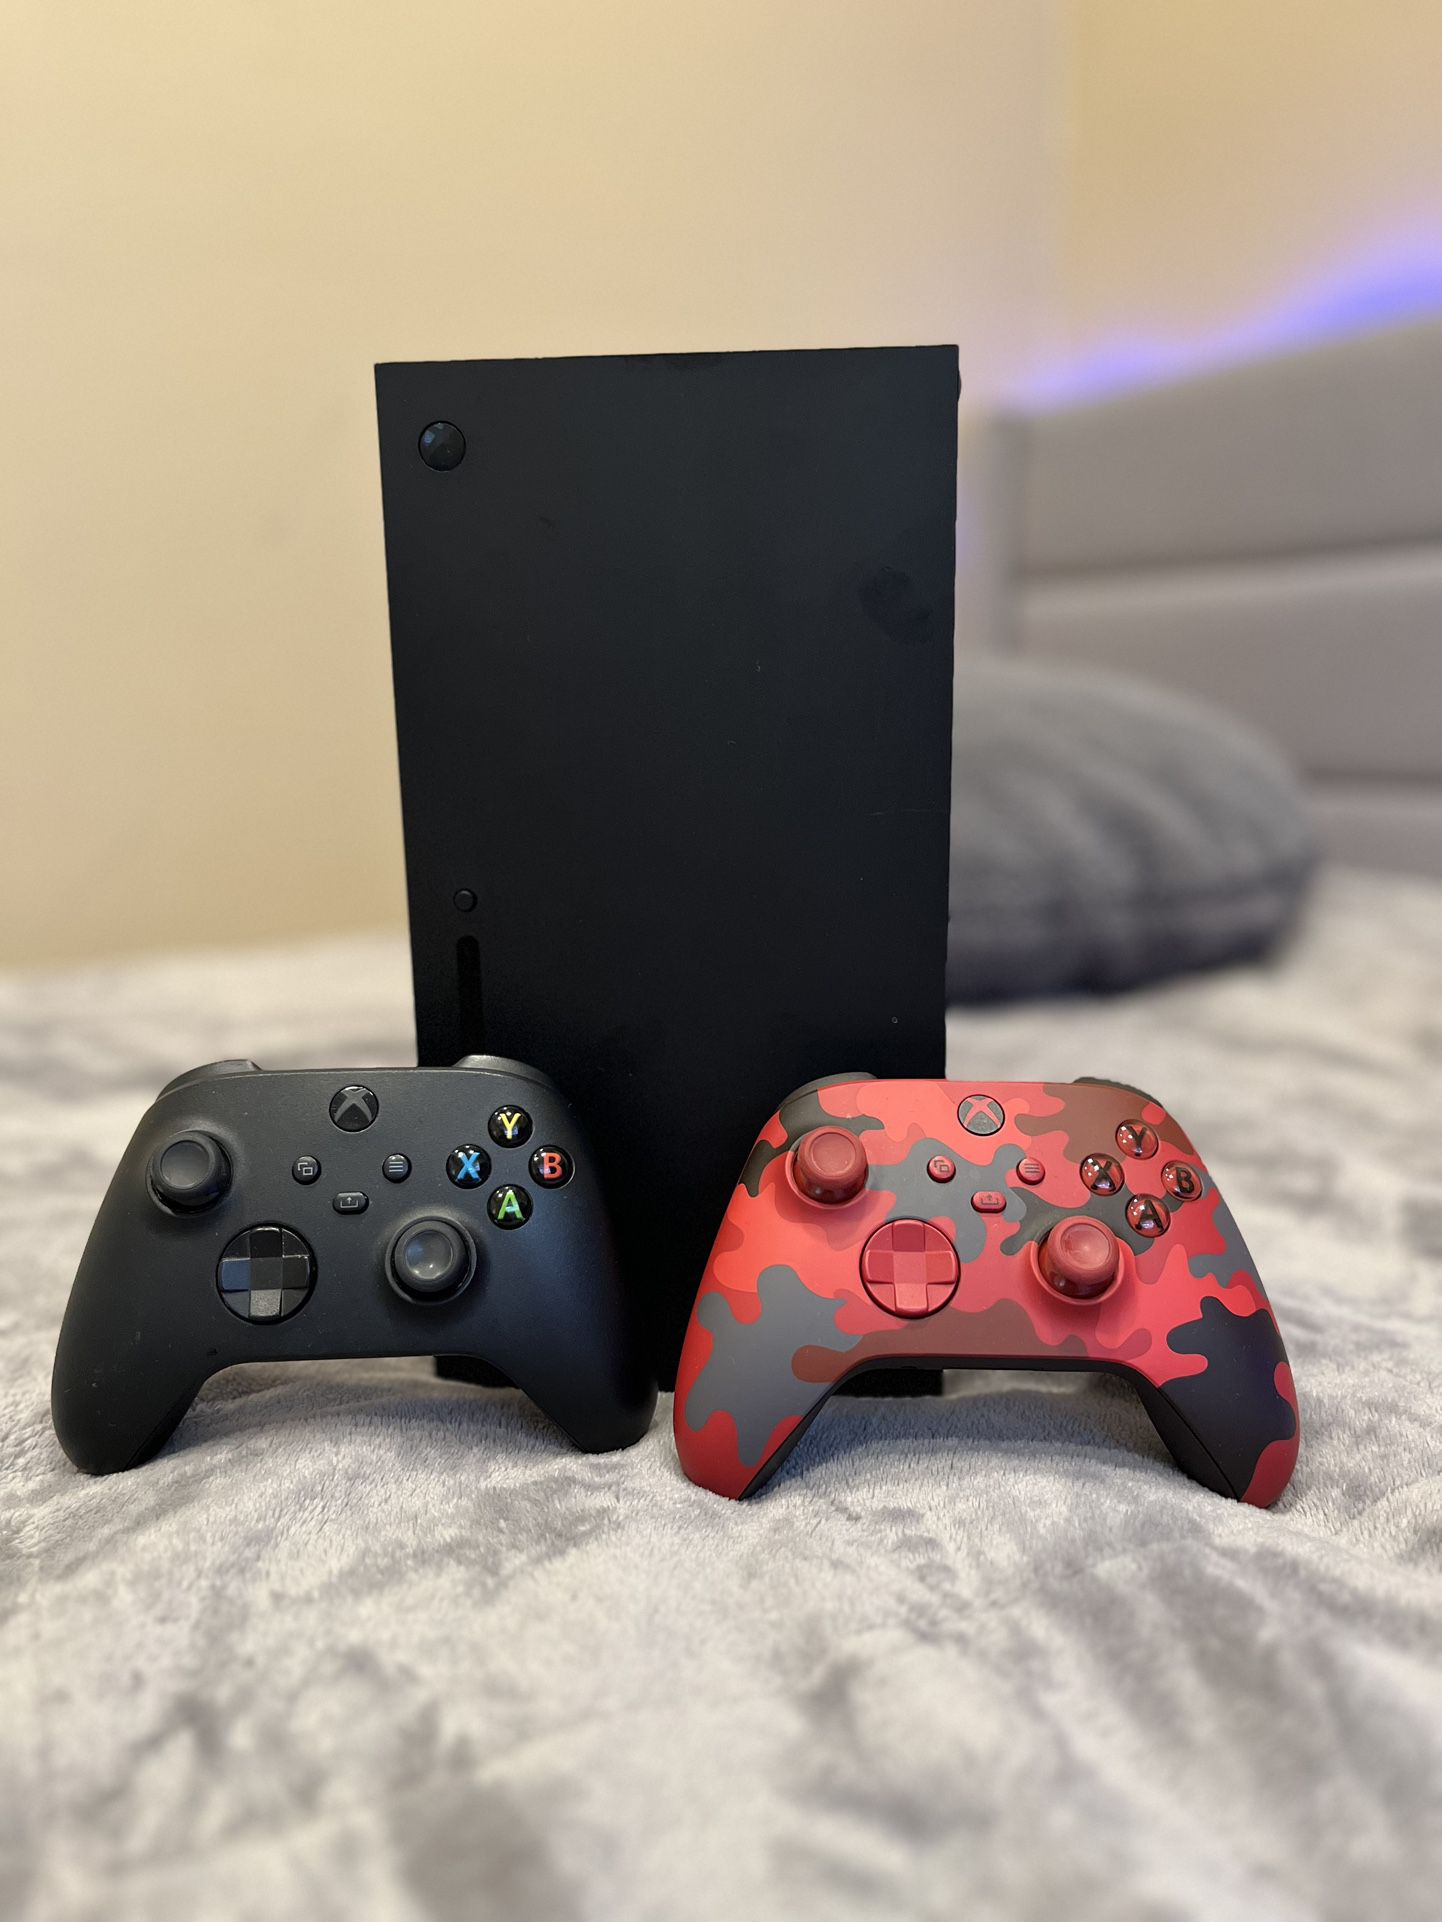 Xbox Series X With 2 Controllers 